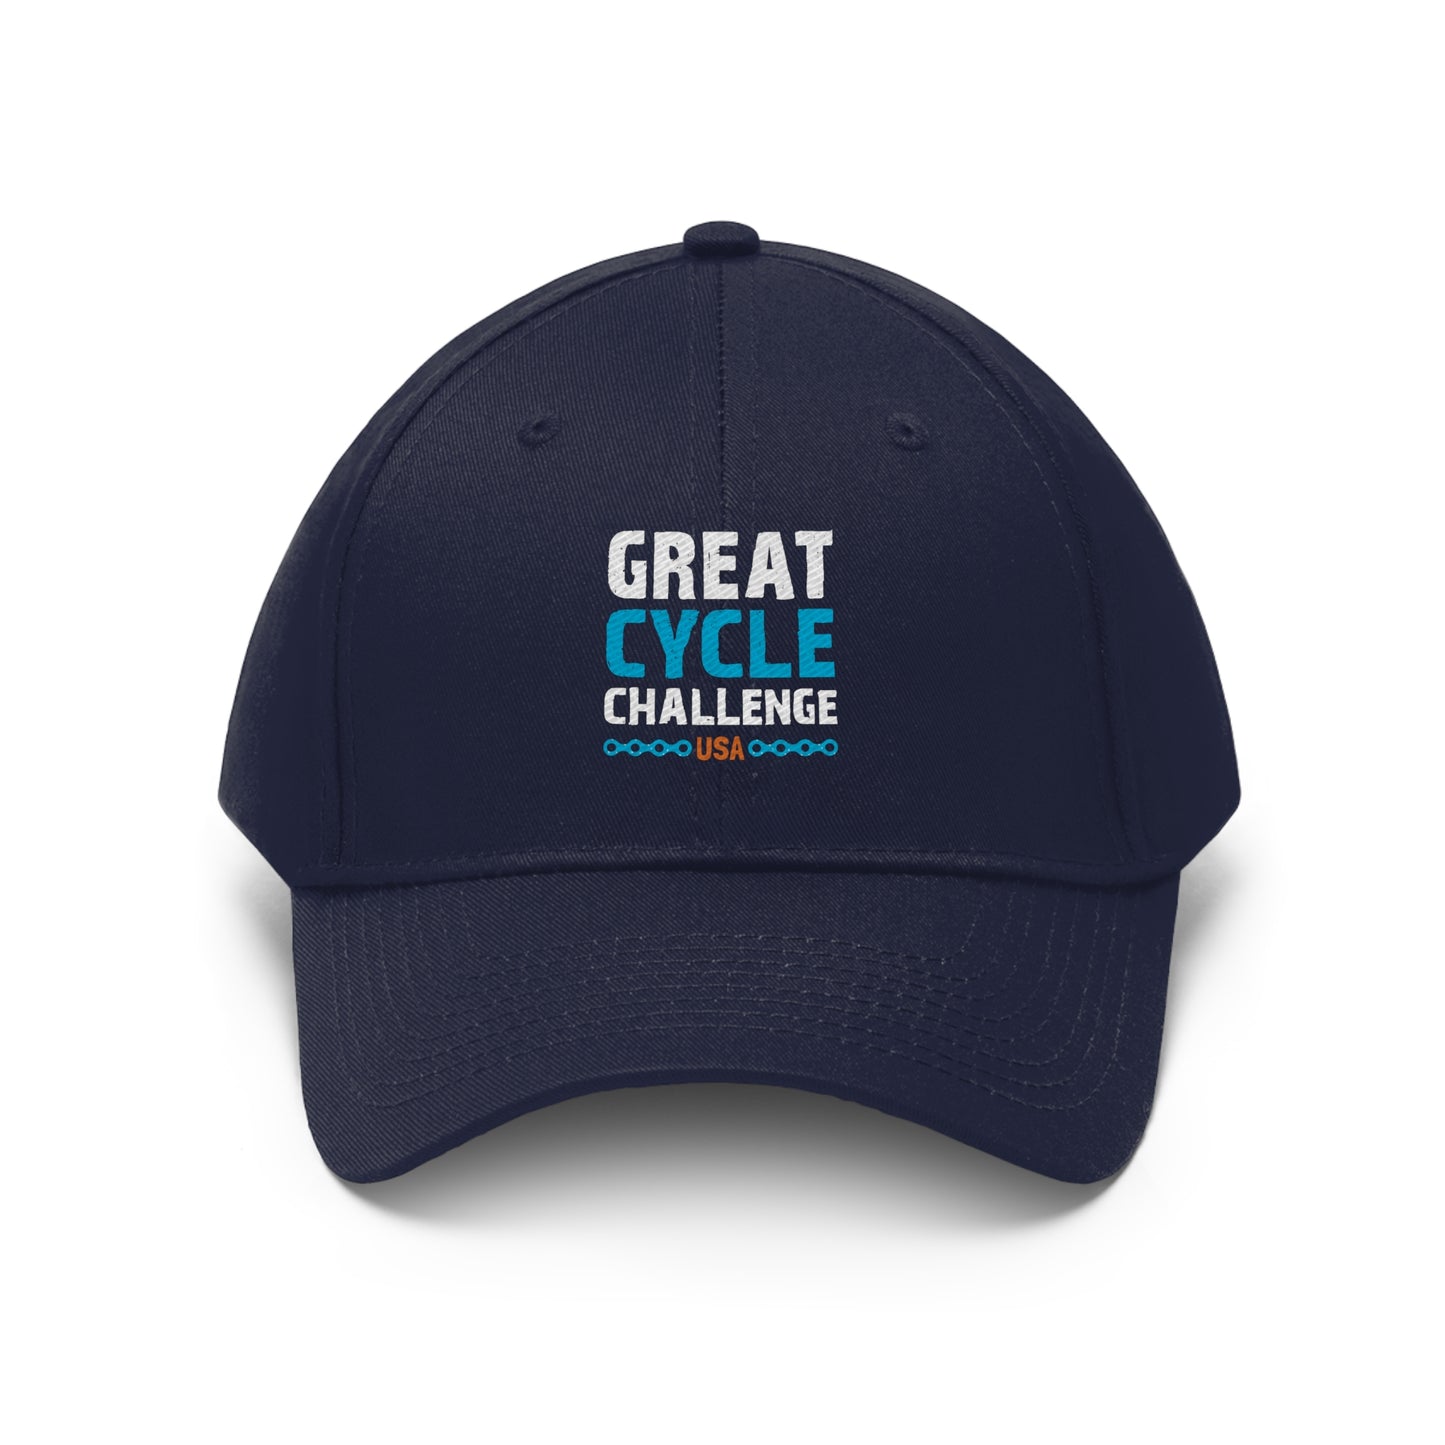 Unisex Twill Hat - Great Cycle Challenge USA